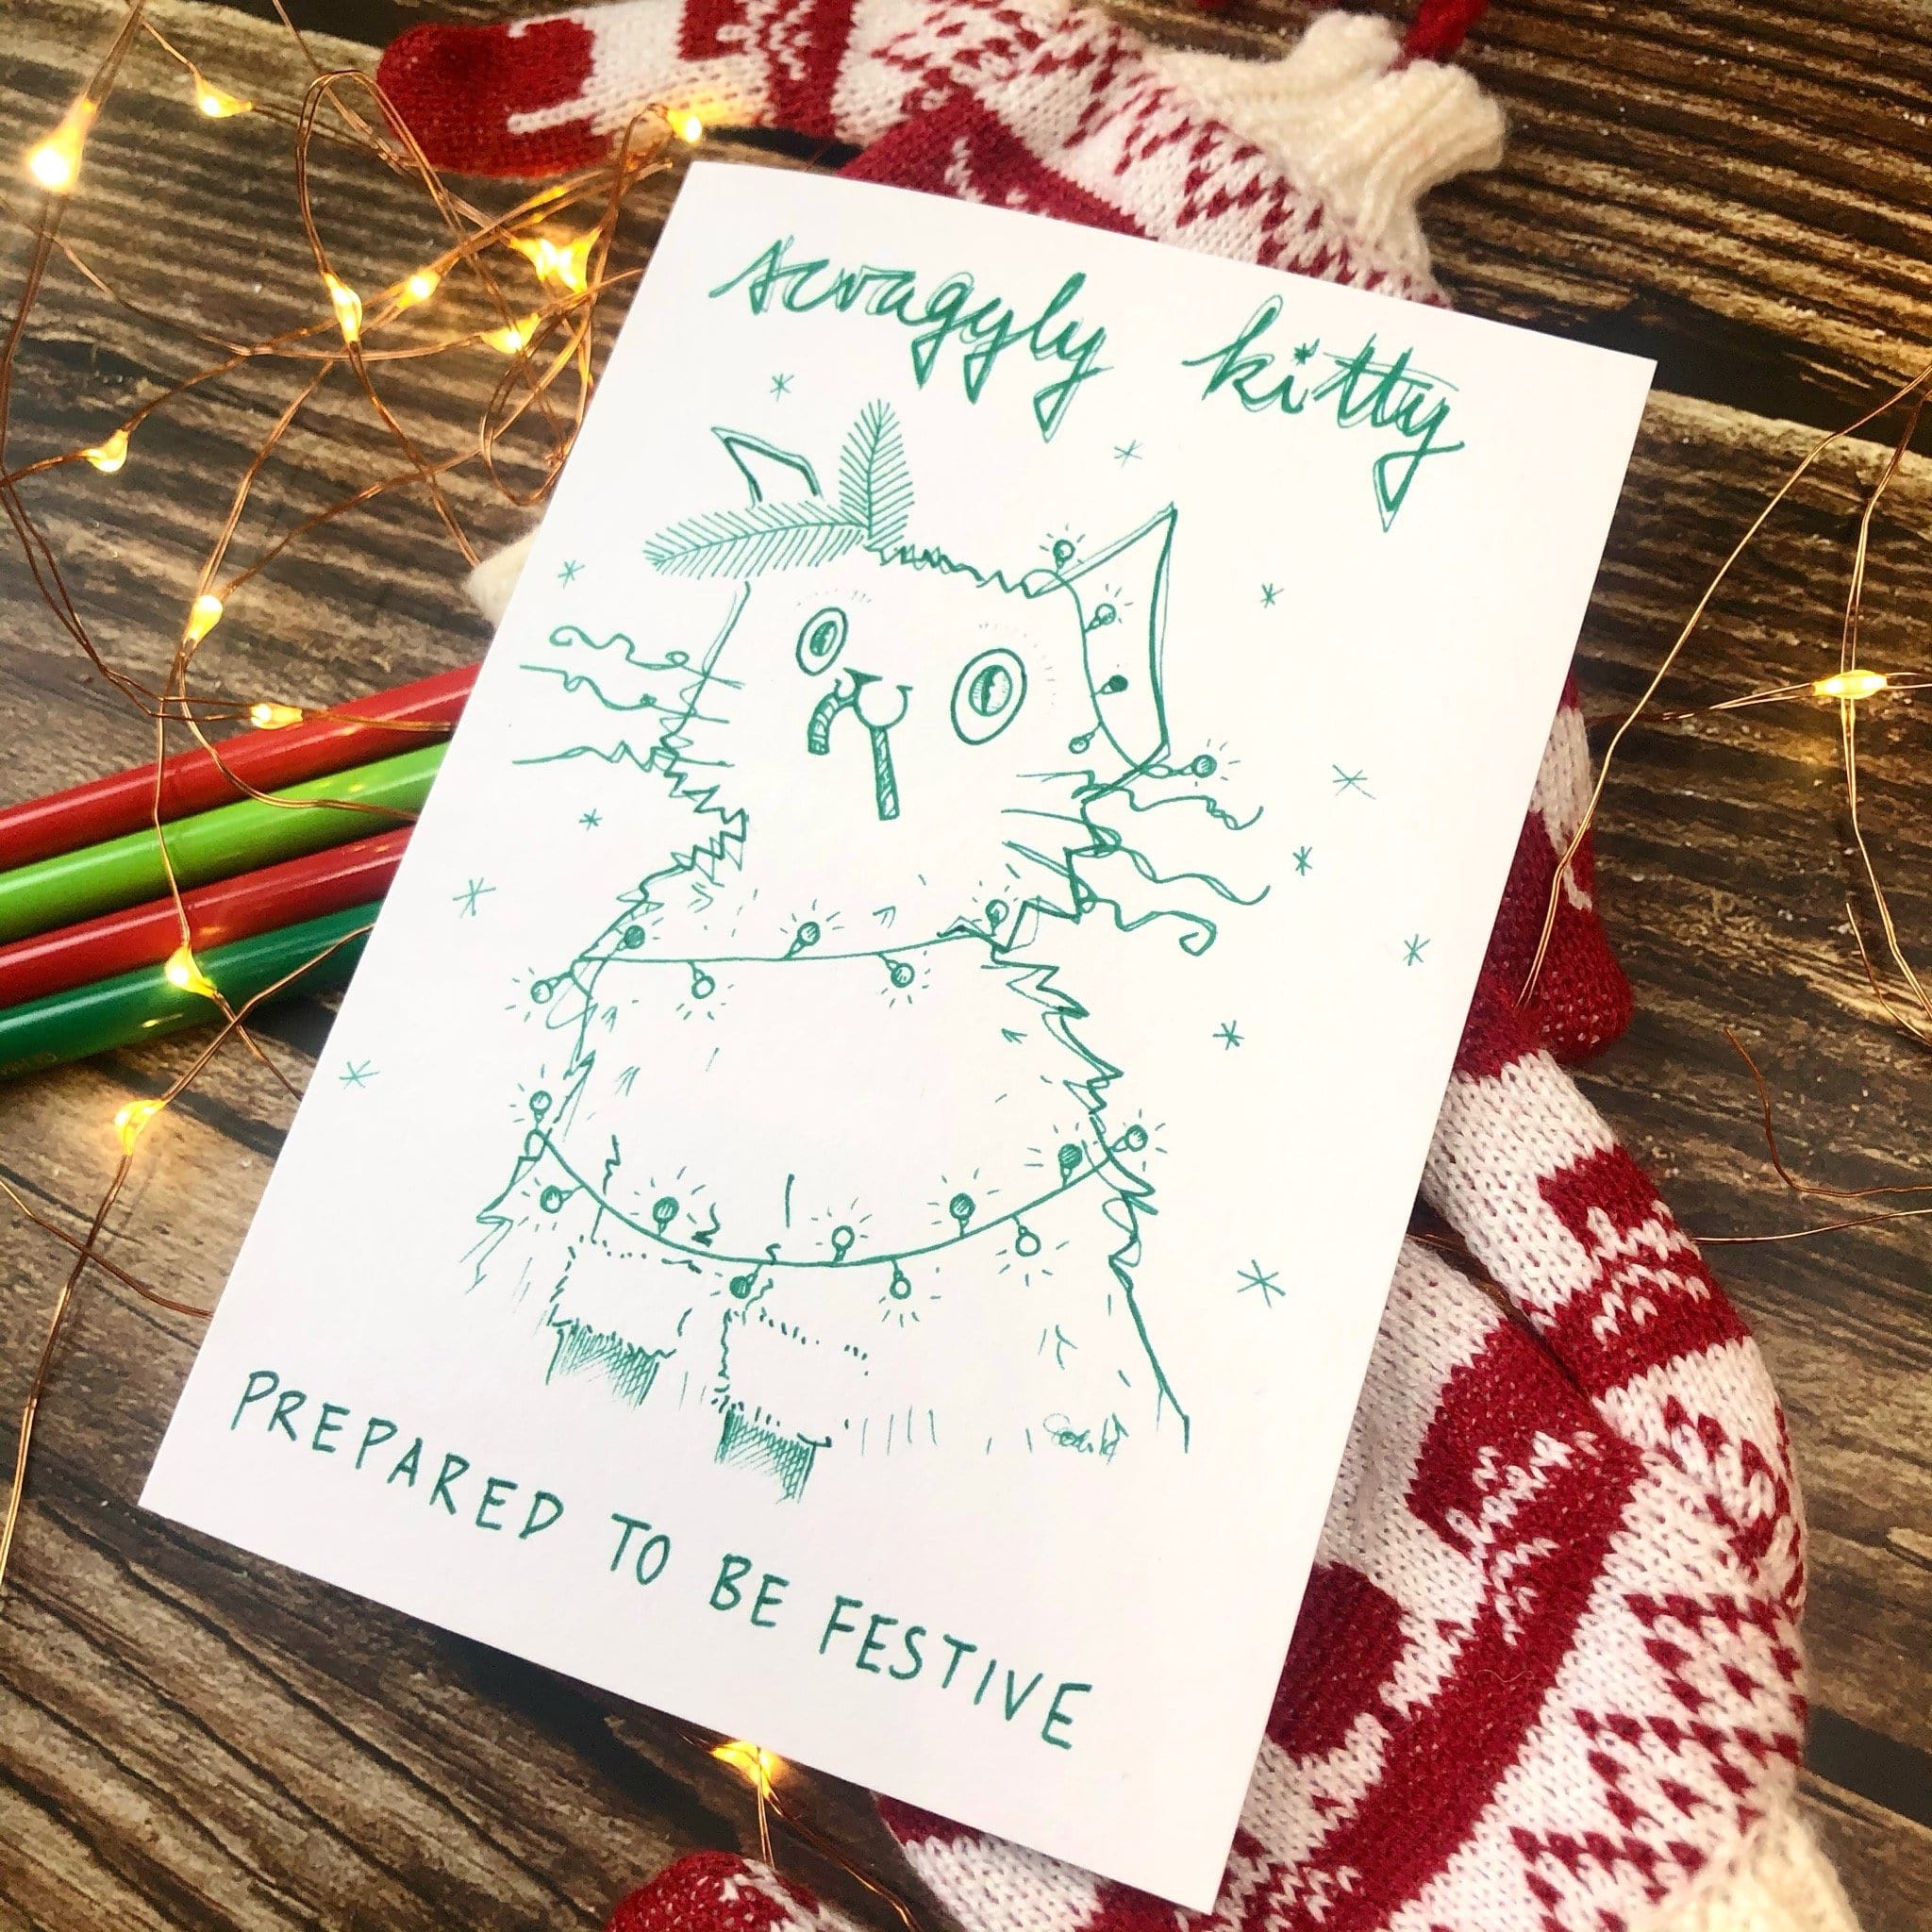 Scraggly Kitty Prepared To Be Festive Christmas Greeting Card Scraggly Kitty Greeting Cards Card